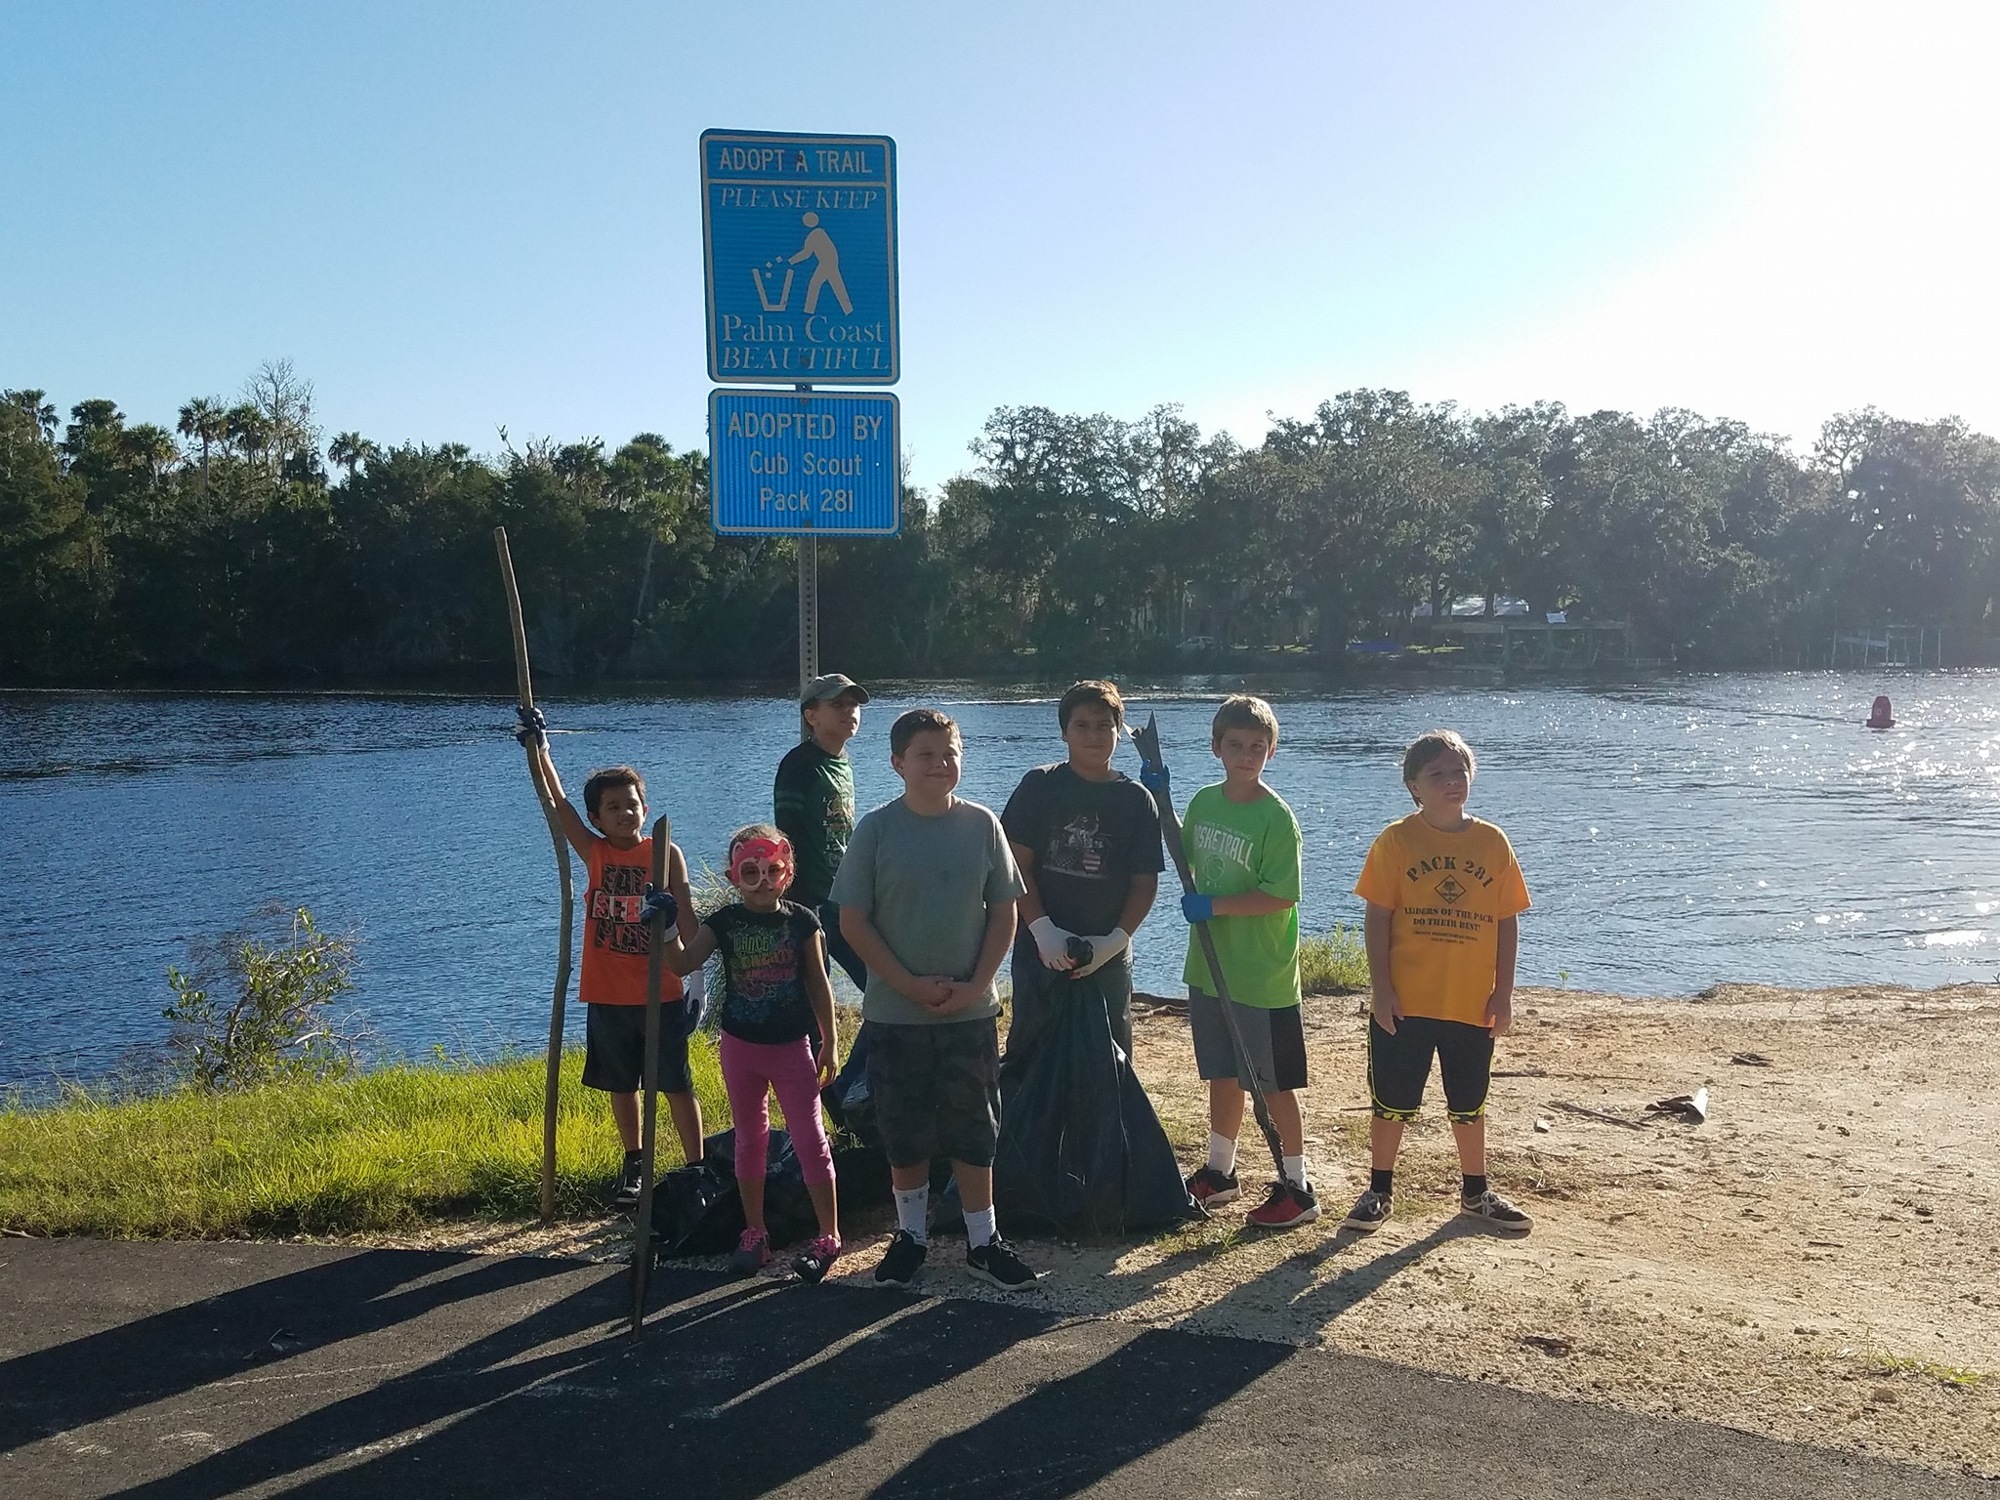 Pack 281 Arrow of Light Cub Scouts spent Oct. 14 cleaning up the pack's adopted trail along the waterfront area of the Intracoastal by European Village. Photo courtesy of Amy Lynne Bowes